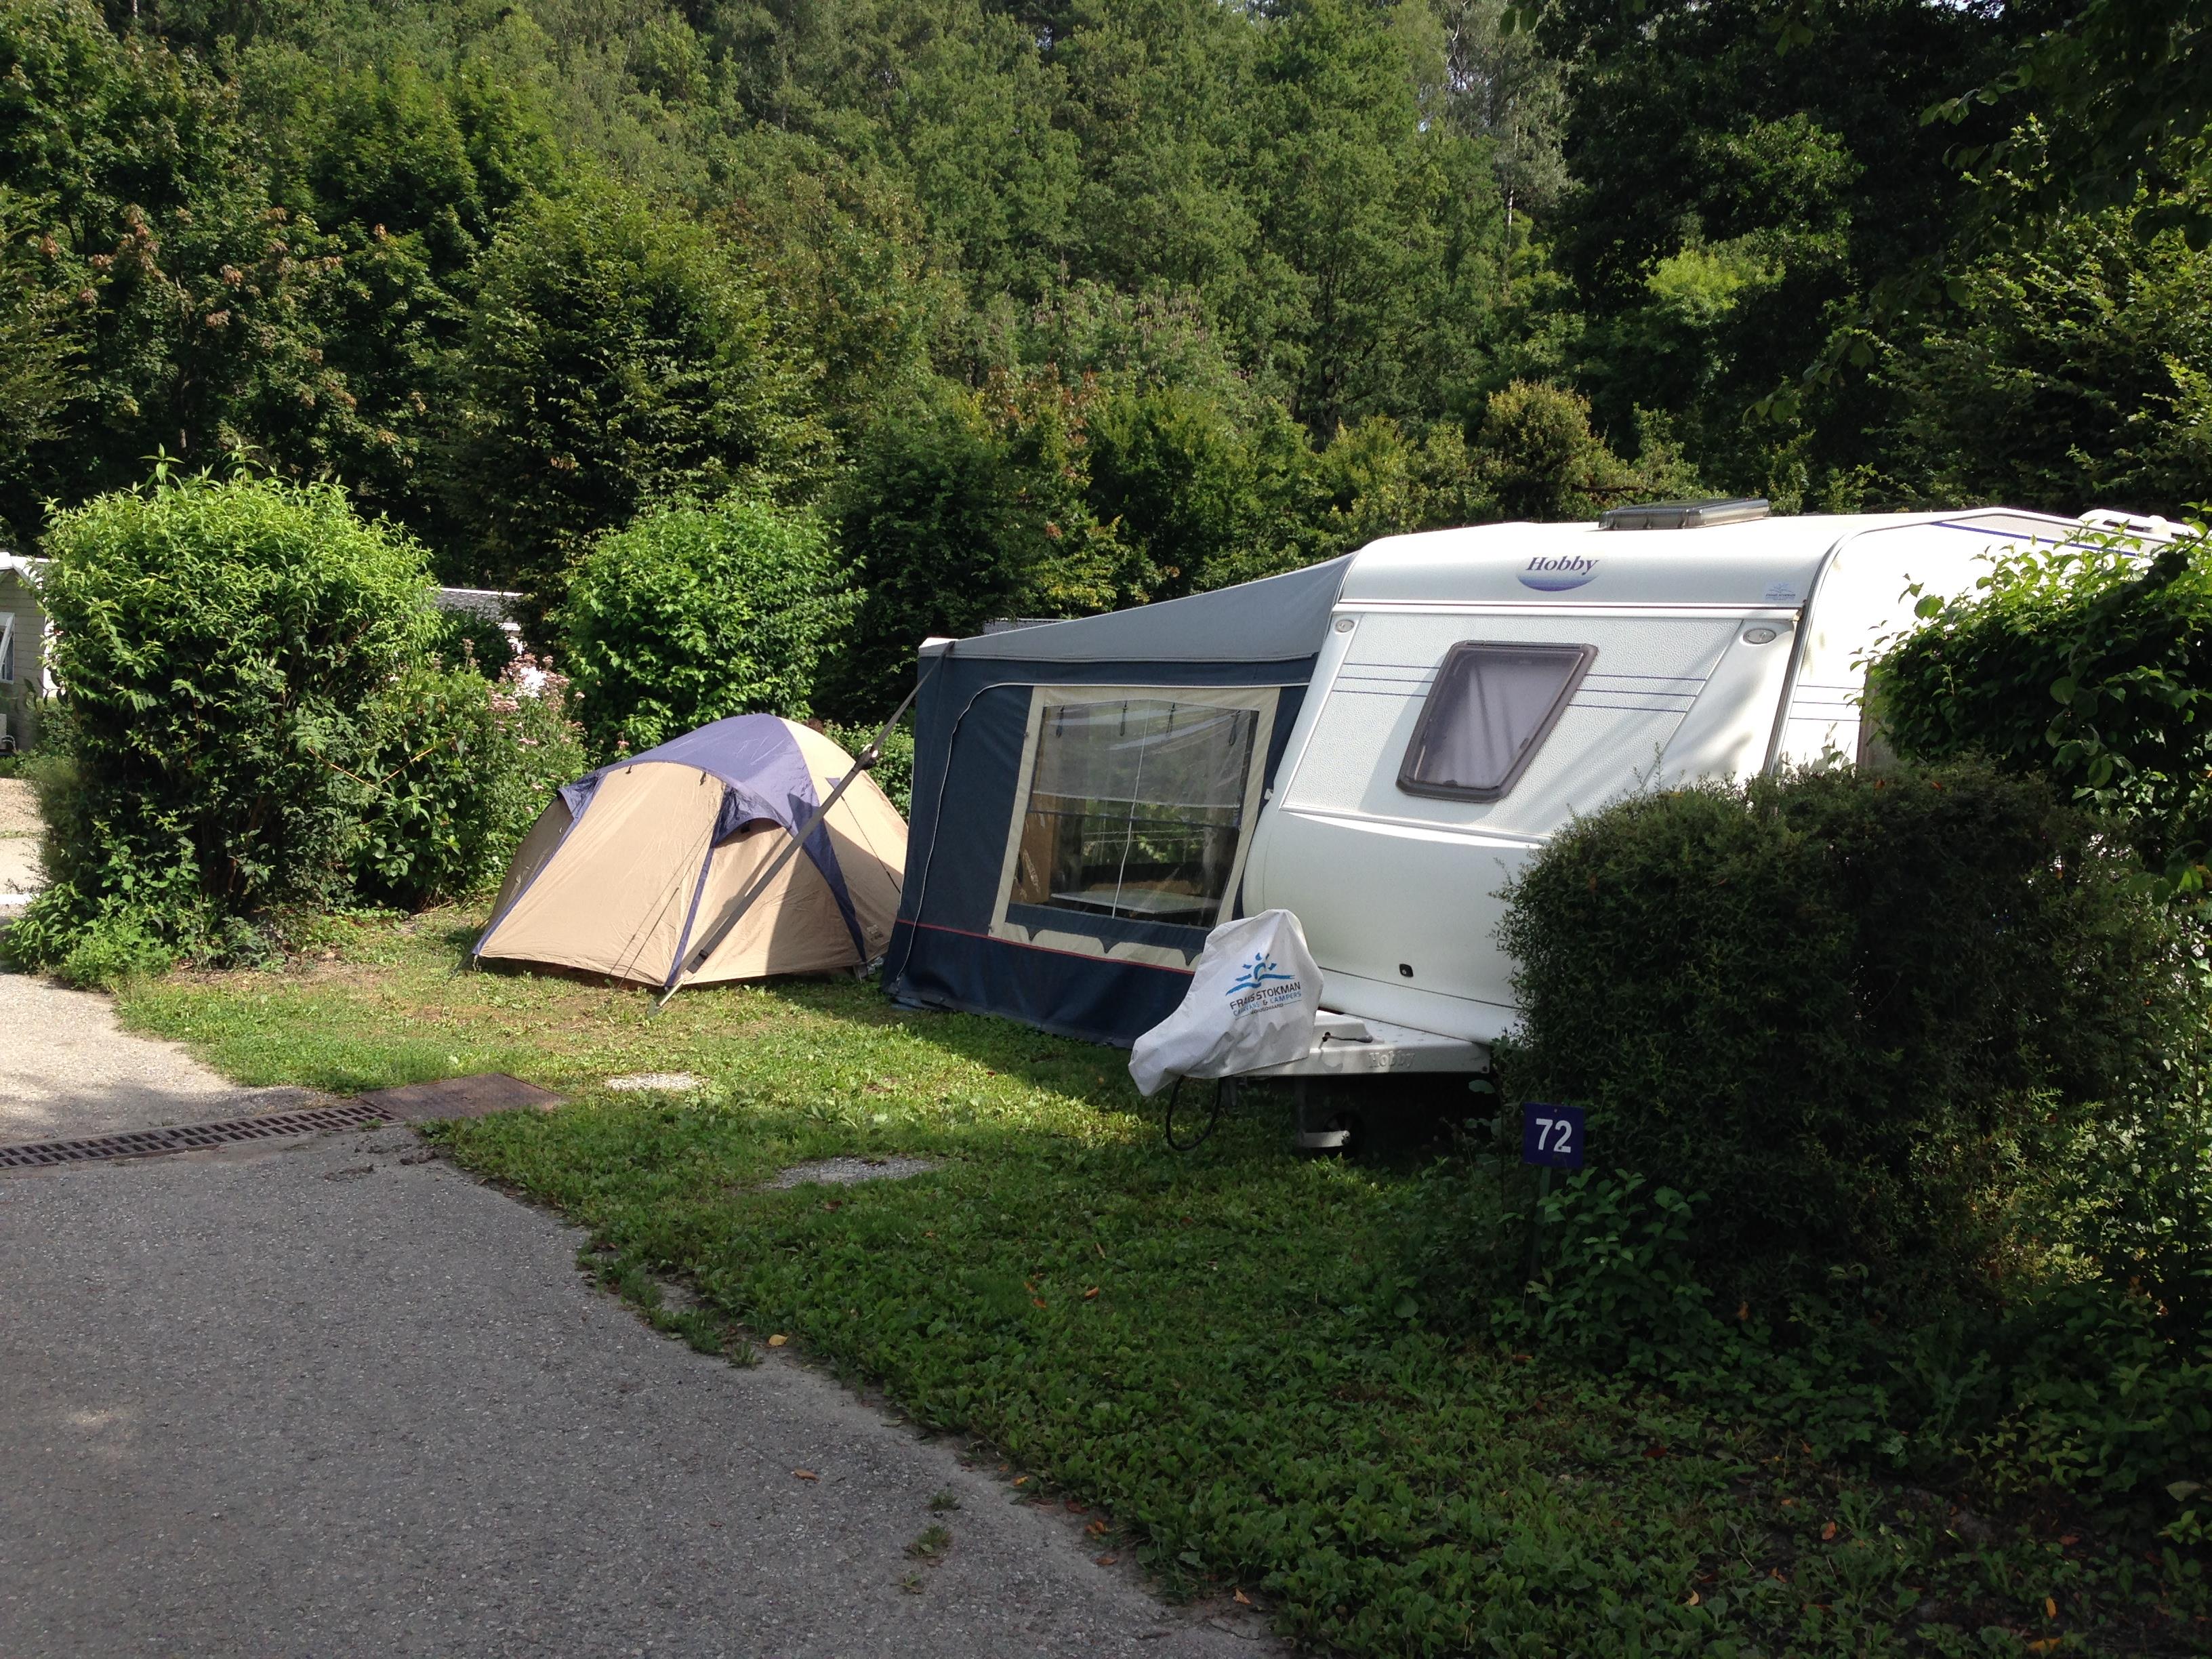 Pitch - Luxury Package Classic Pitch 100M² (1 Tent, 1 Caravan Or 1 Camper / 1 Car / Electricity 16A) + Water Connection And Dark Water Disposal - Camping Qualité l'Eden de la Vanoise